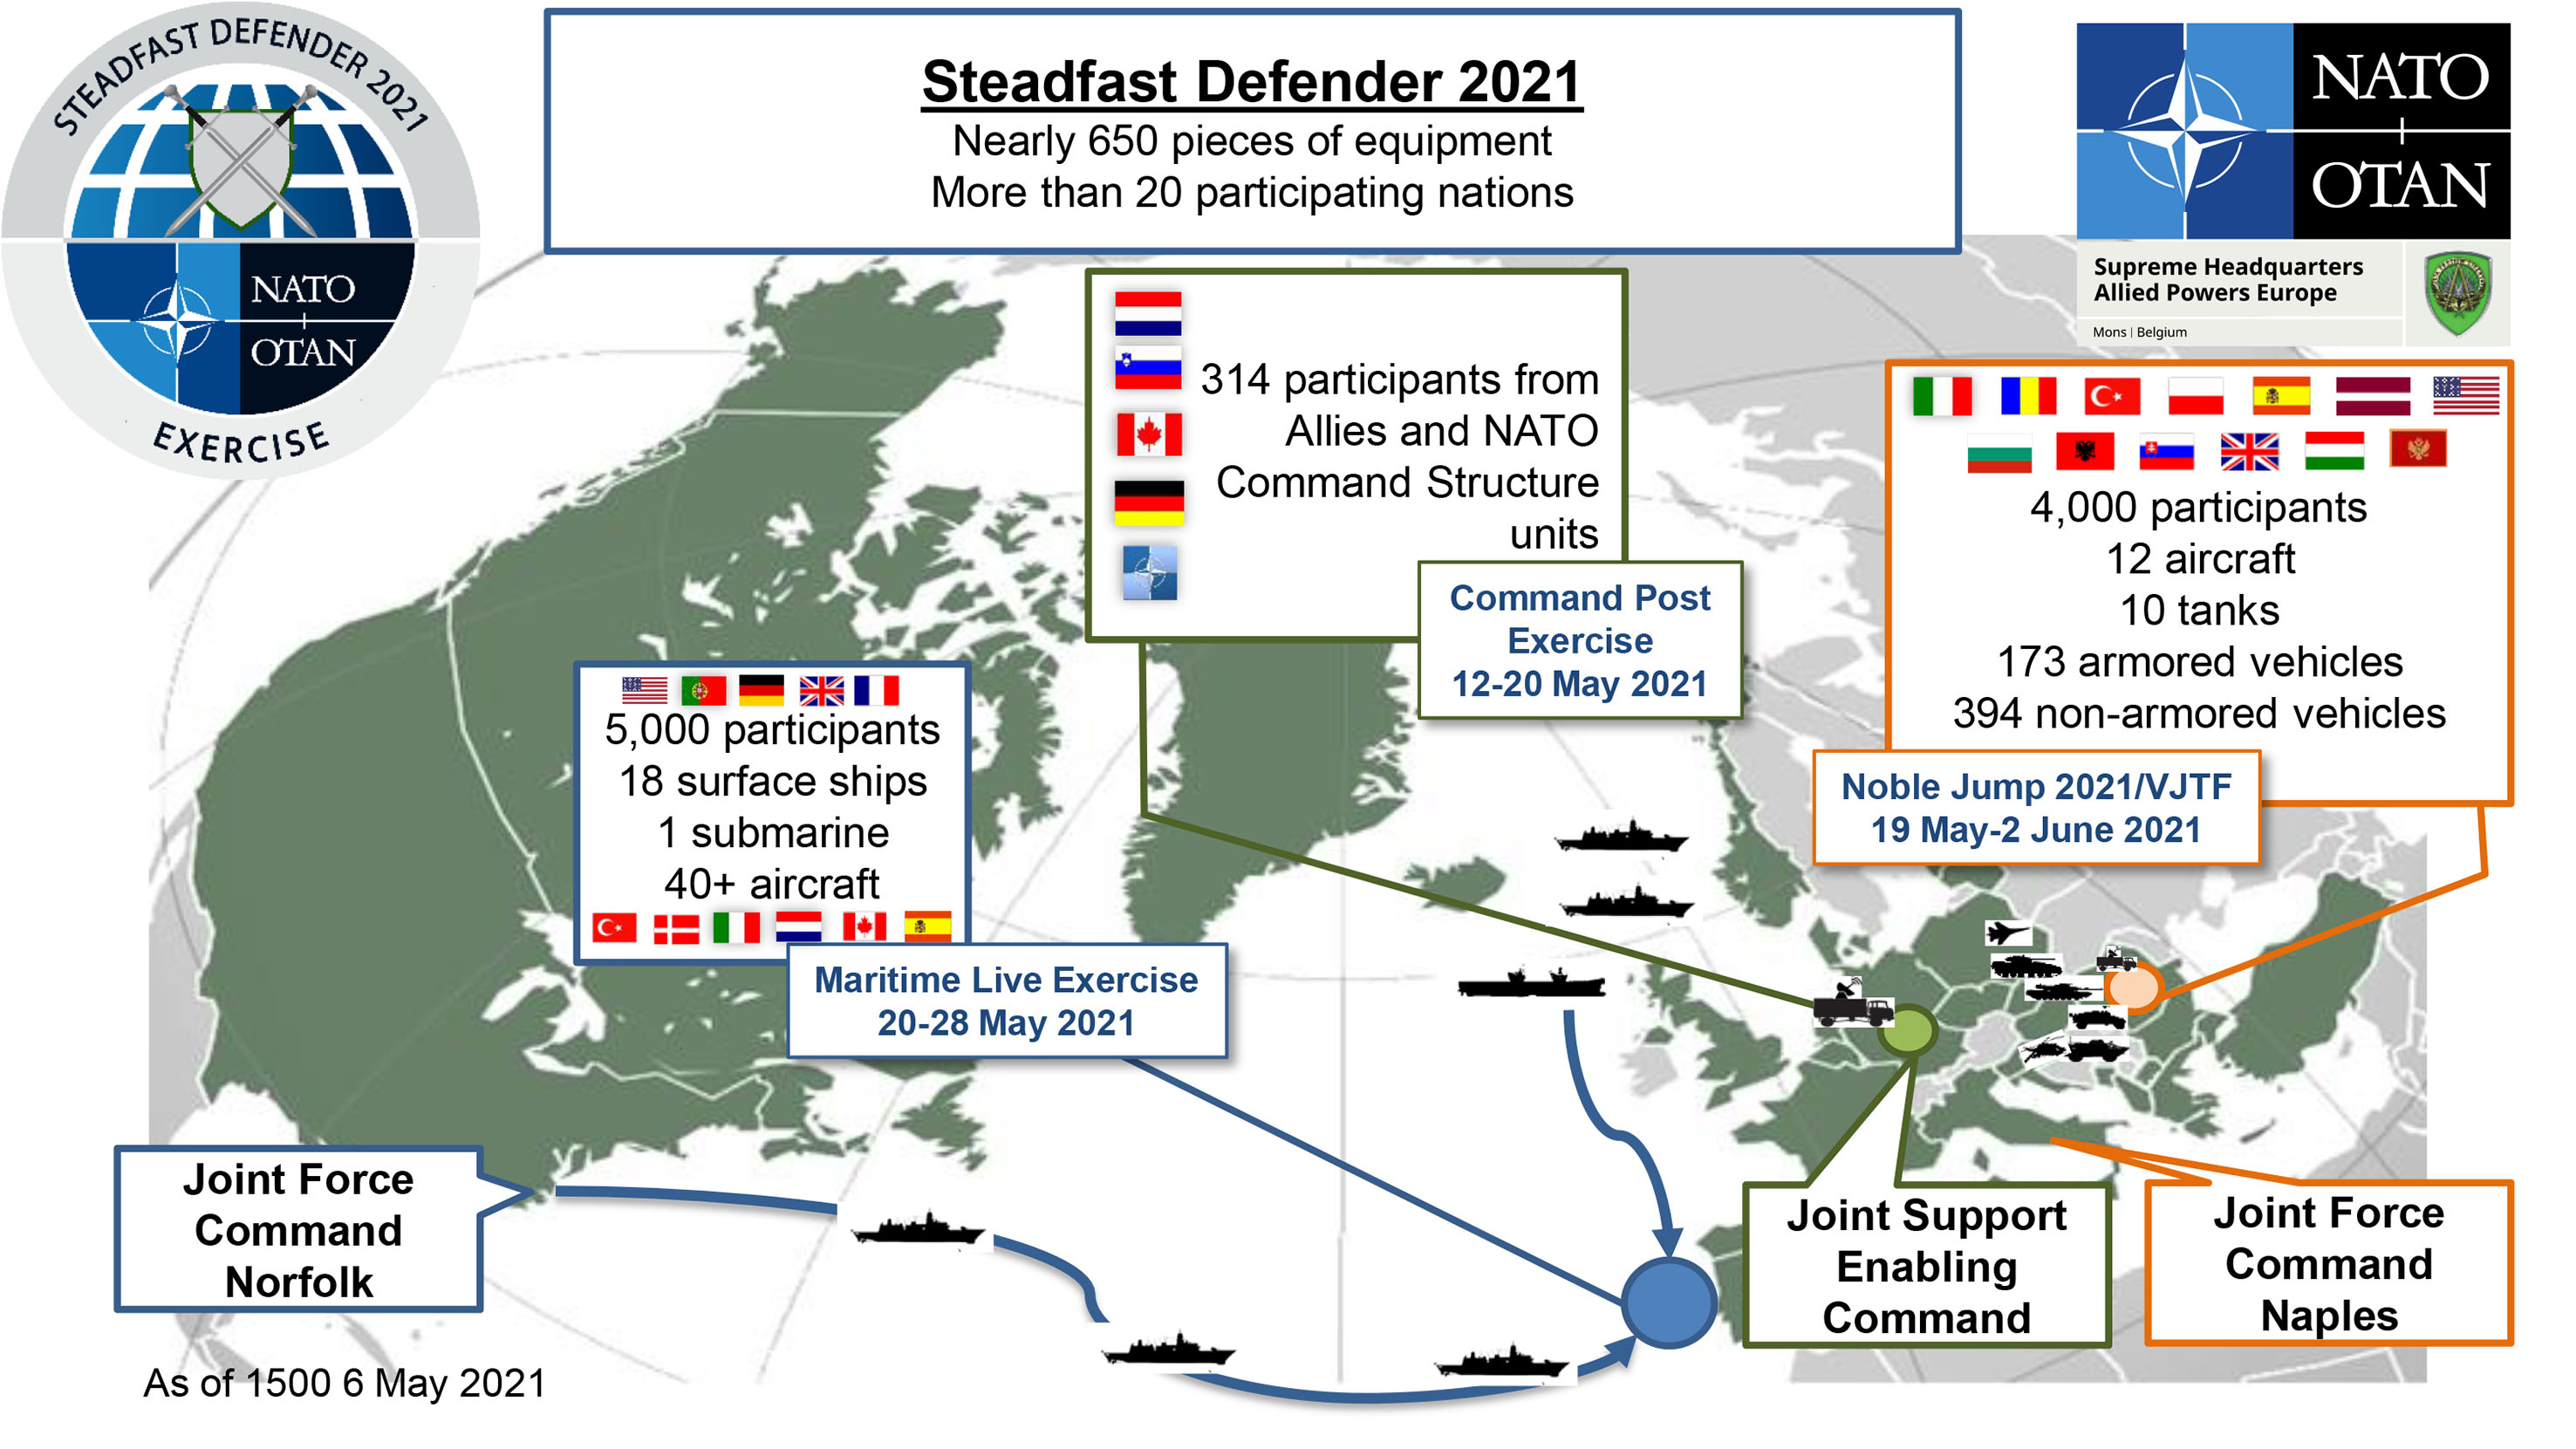 Exercise ‘Steadfast Defender 2021’ will test NATO's adapted command structure. (NATO)